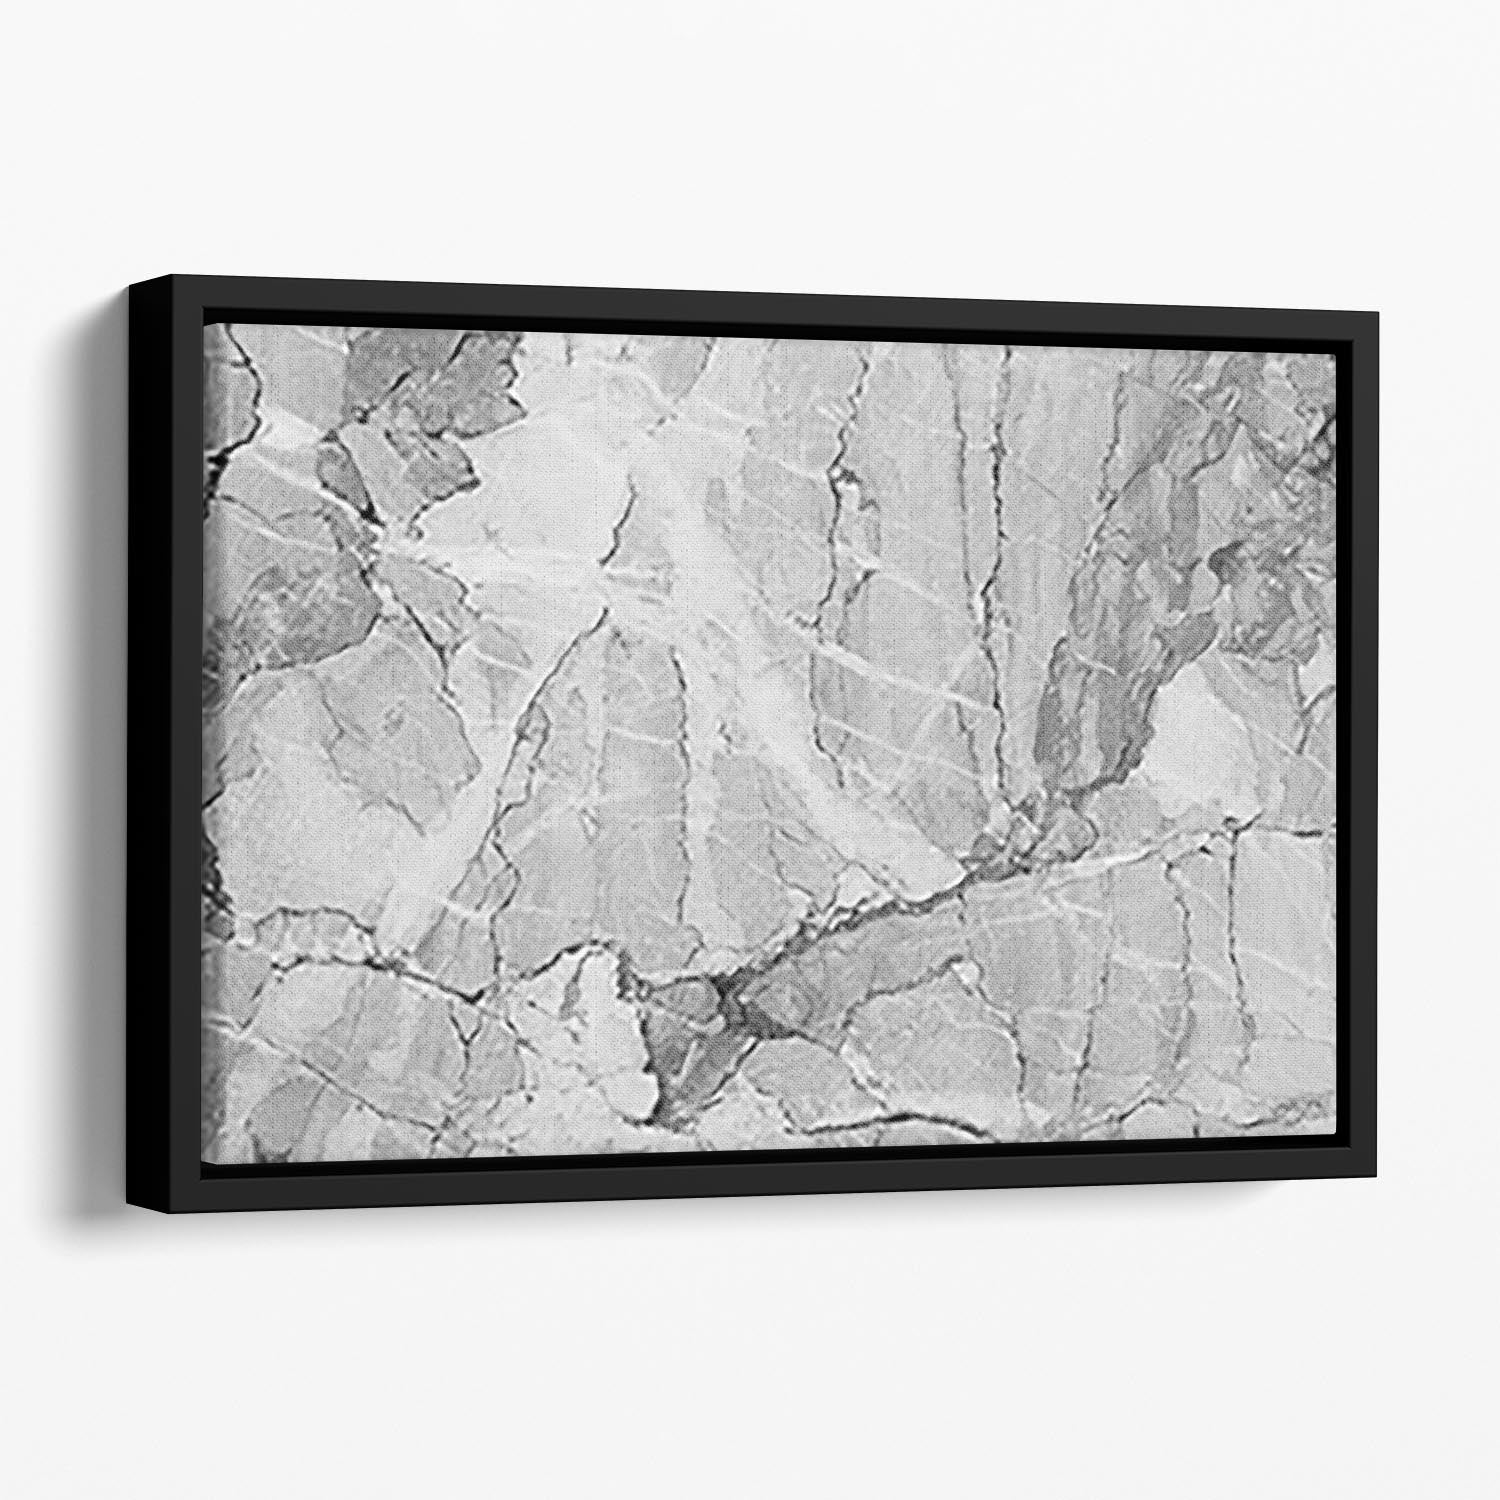 Grey Abstract Textured Marble Floating Framed Canvas - Canvas Art Rocks - 1